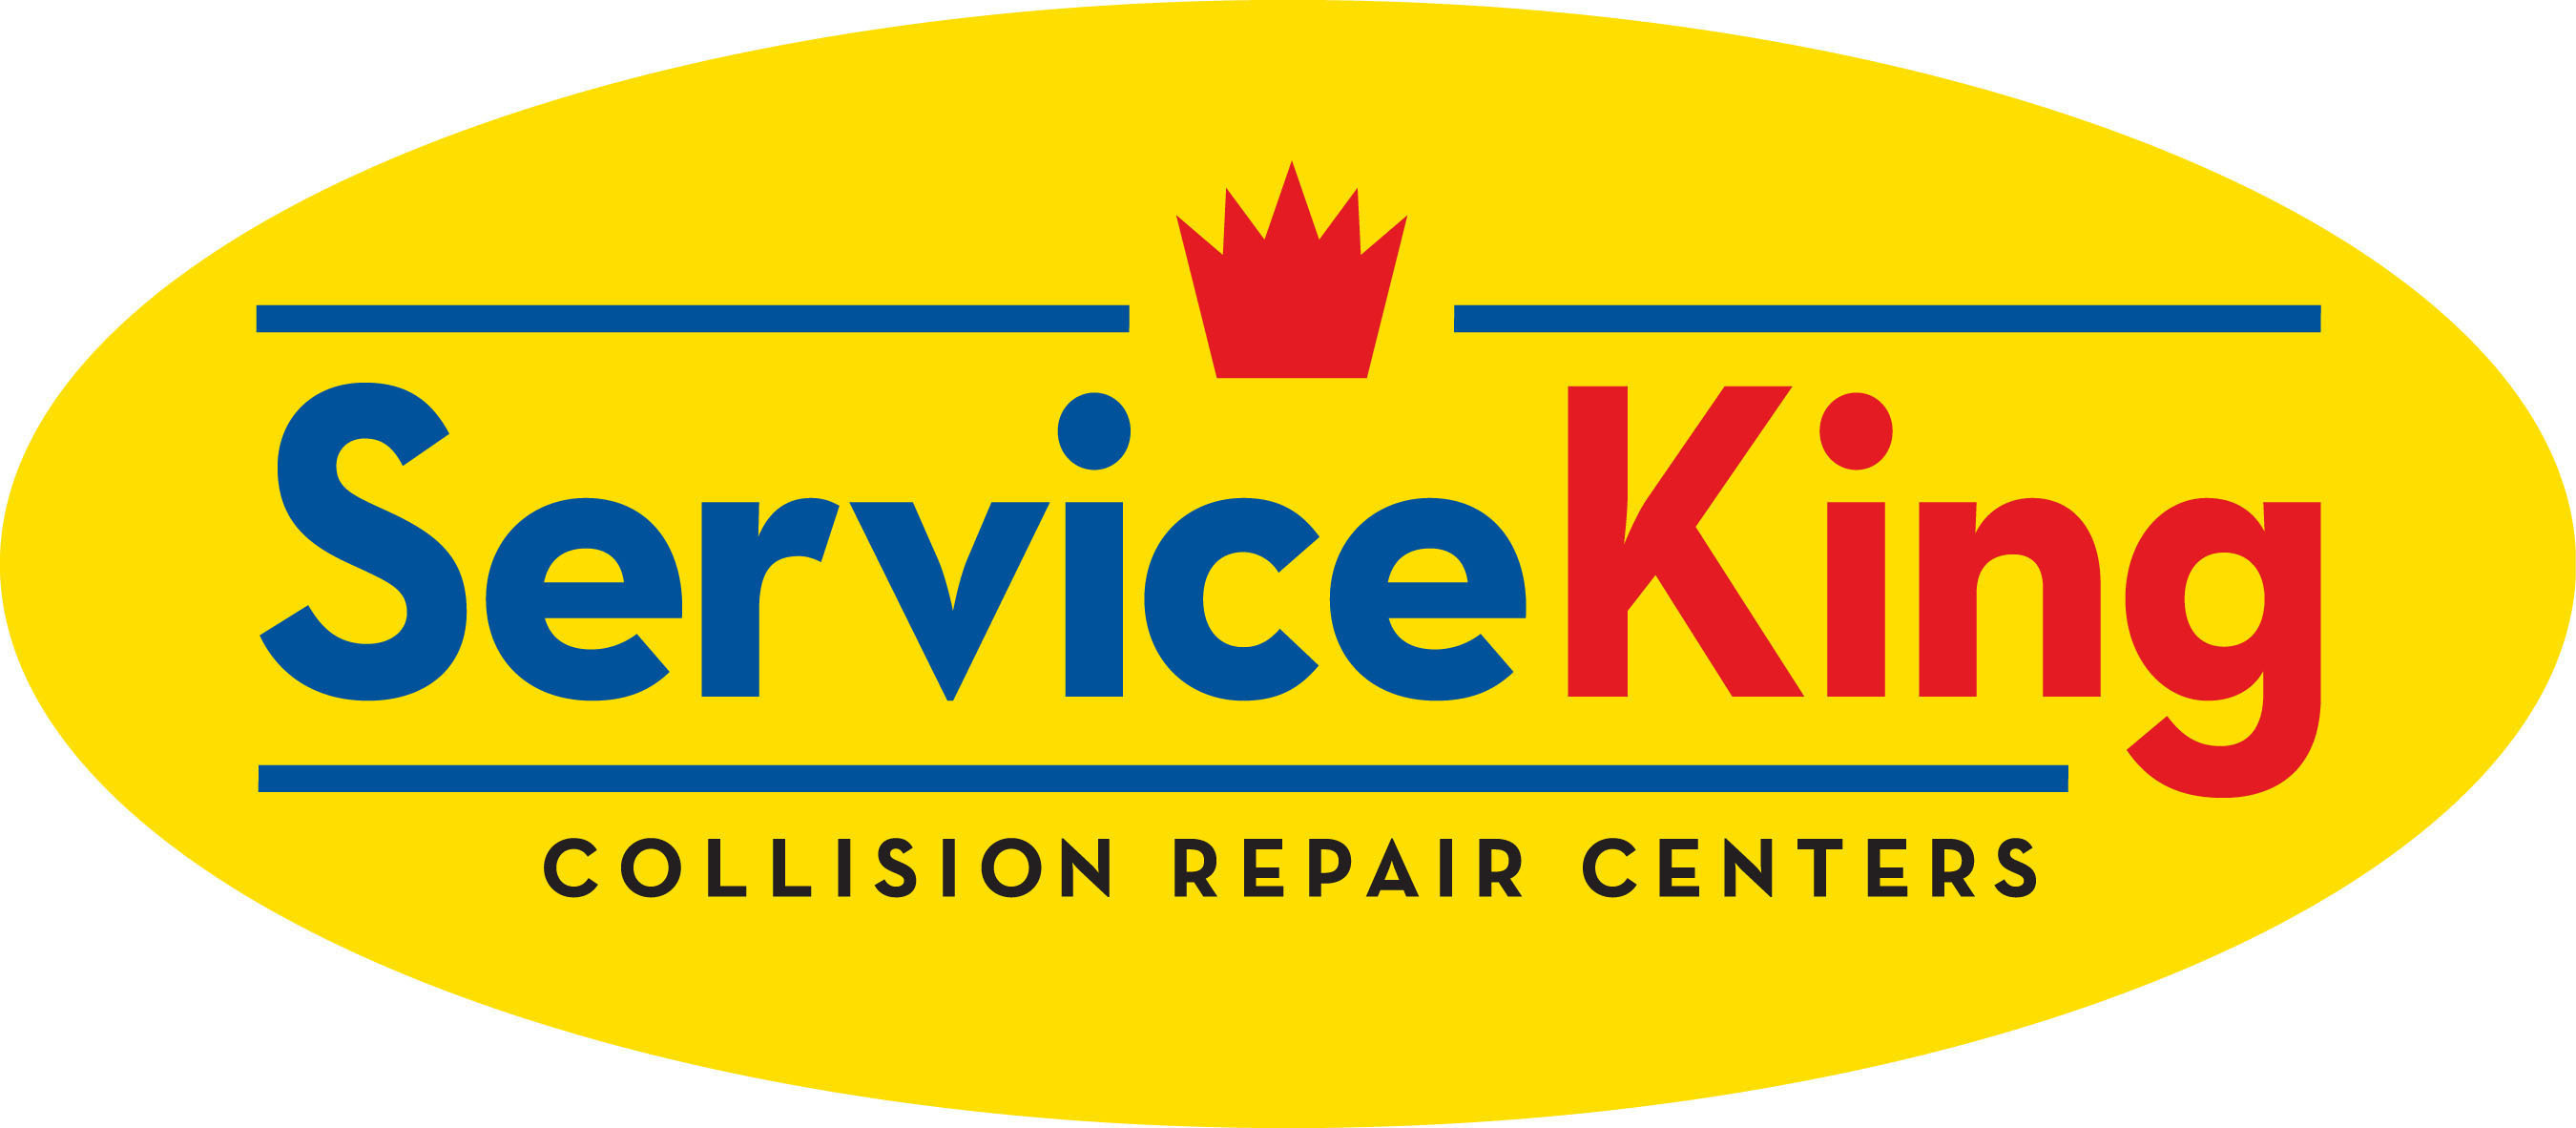 Service King Collision Repair Centers.